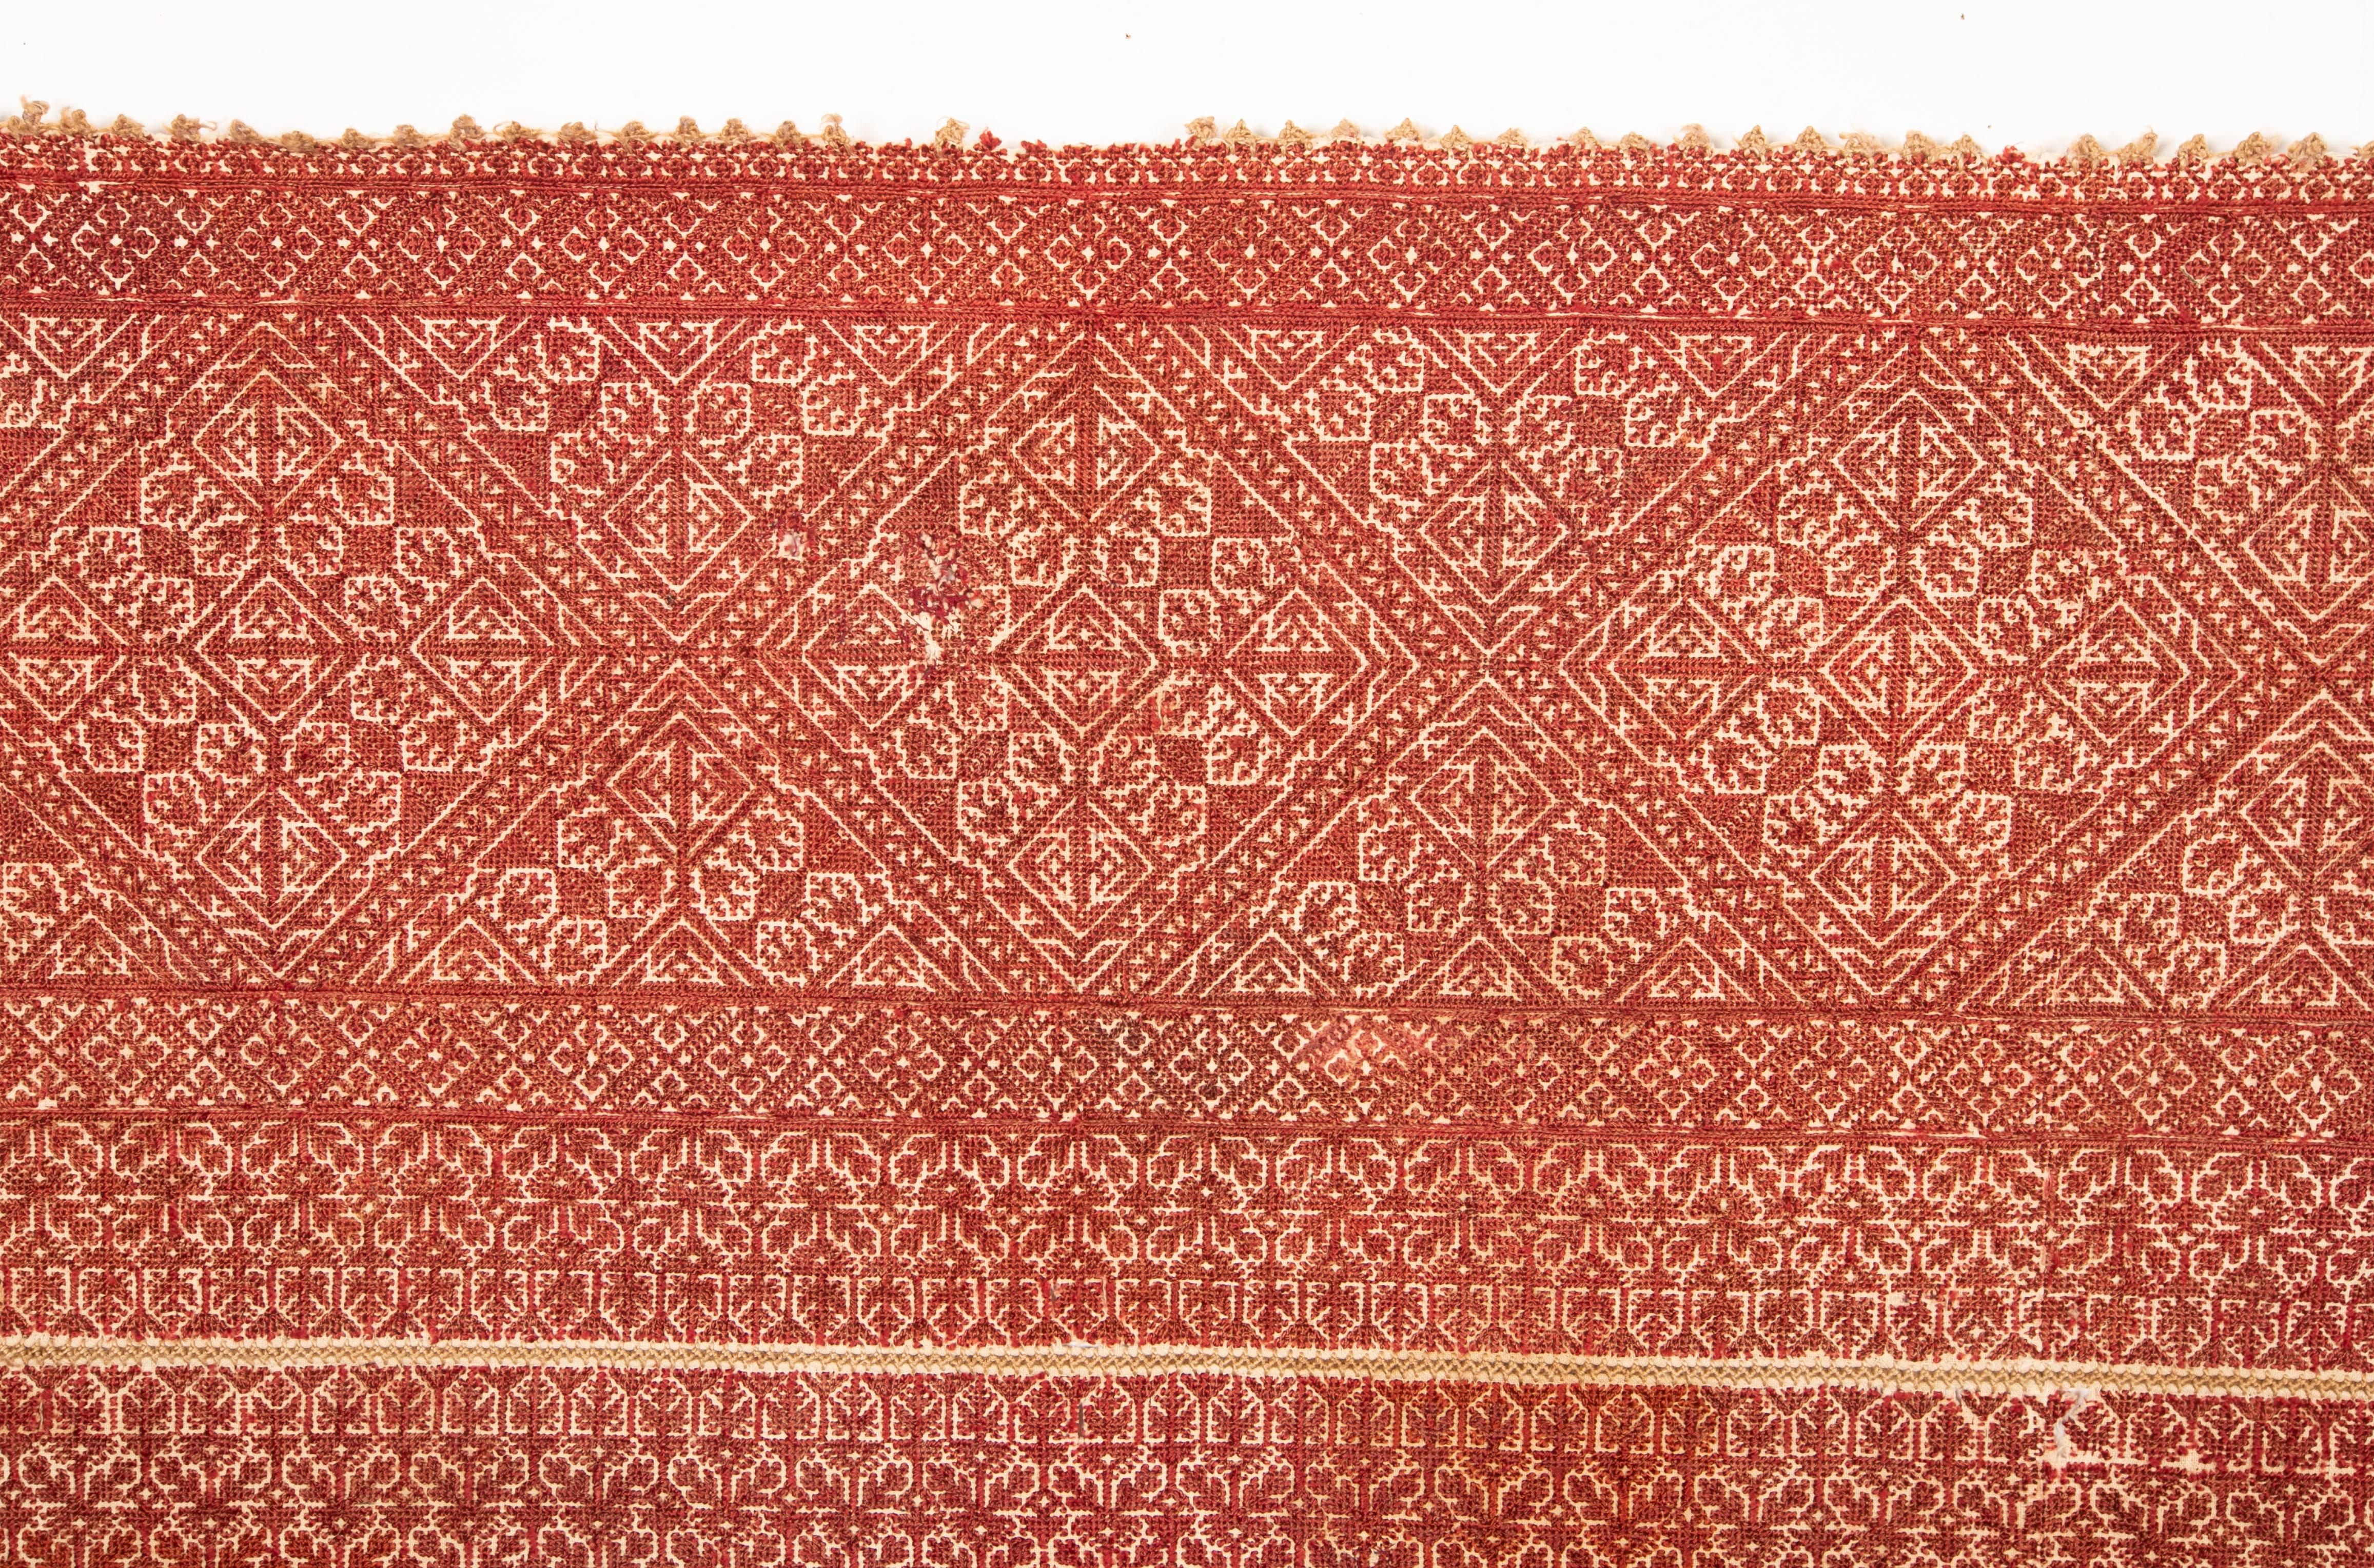 Islamic Antique Fez Embroidery from Morocco, 1900s